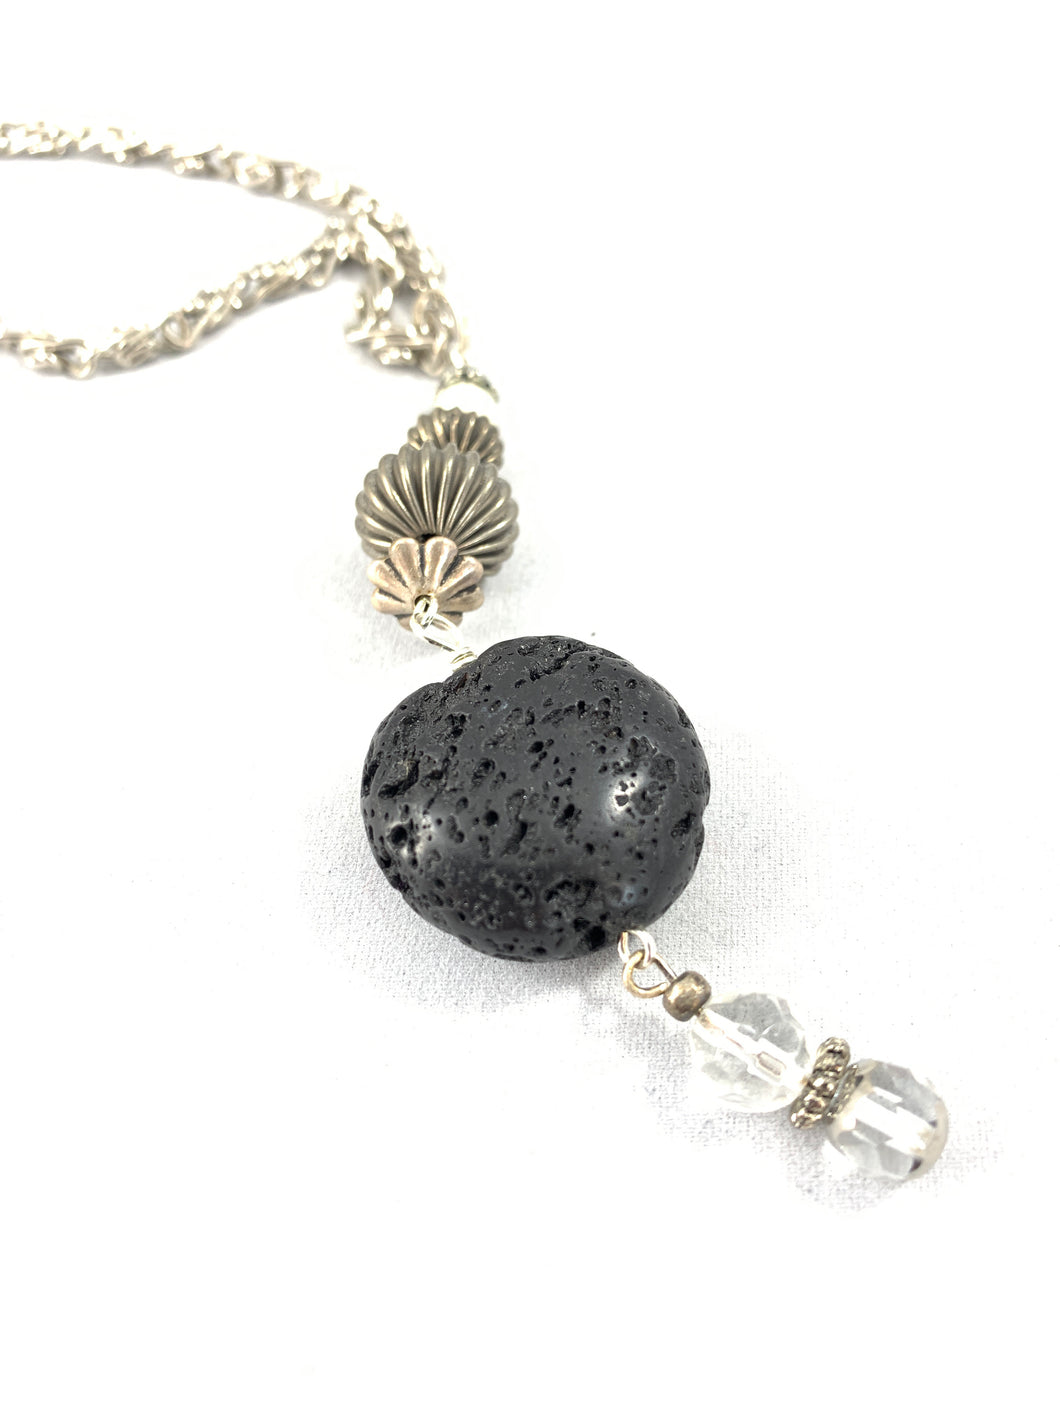 Essential Oil Diffuser Necklace with Facet Beads